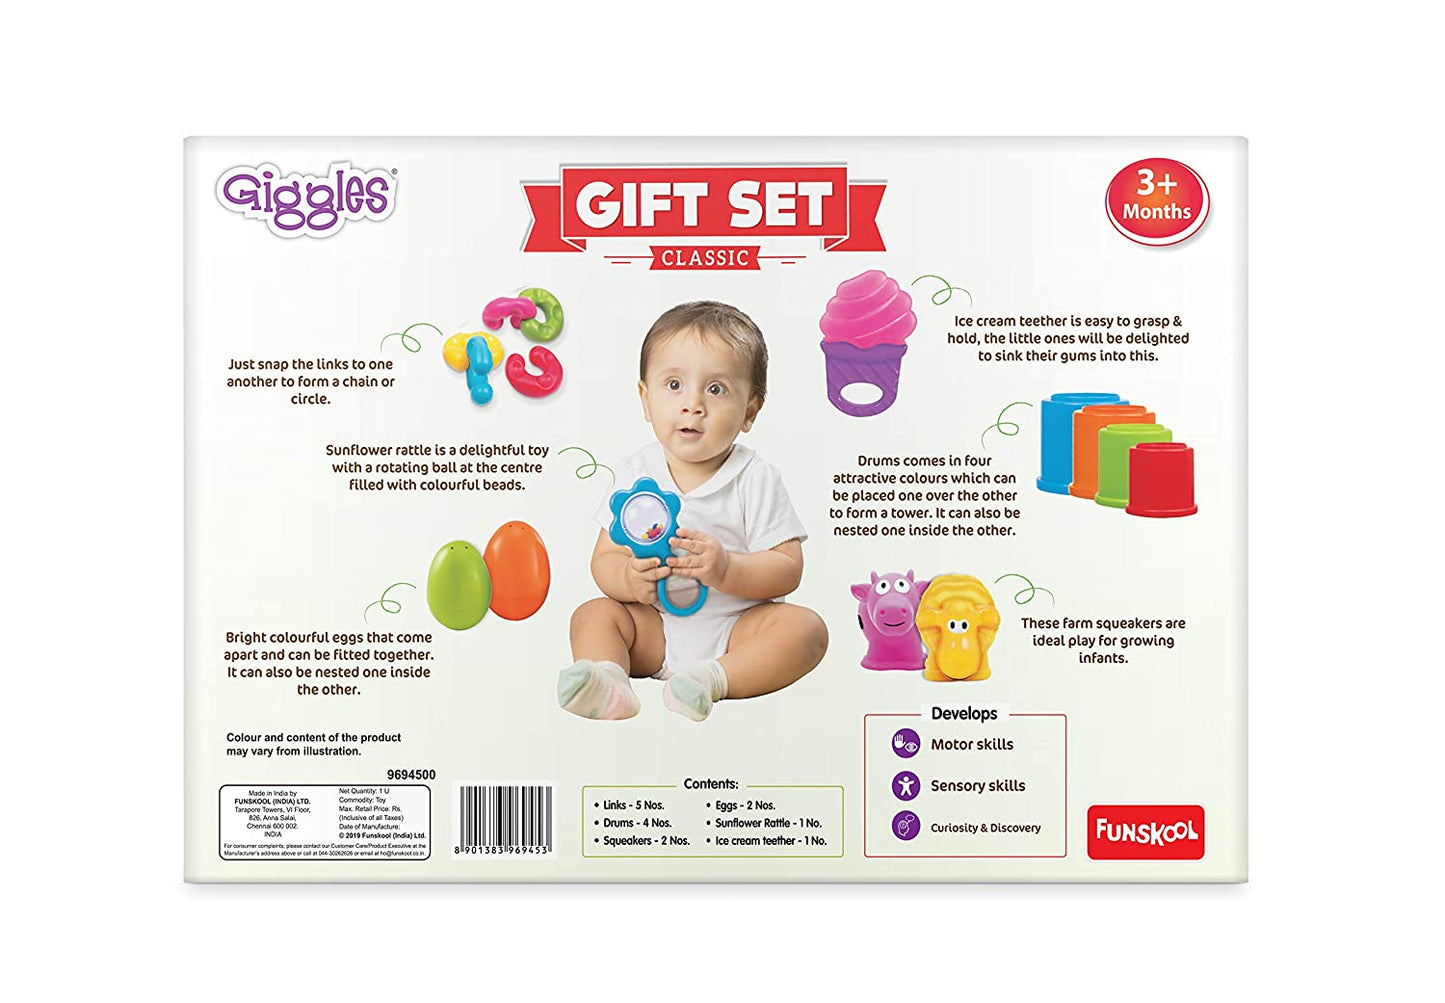 Giggles - Gift Set Classic , Multicolour Baby Toy Gift Set for New Born , Stack,Nest,Link,Squeakers,Teether,Rattle ,